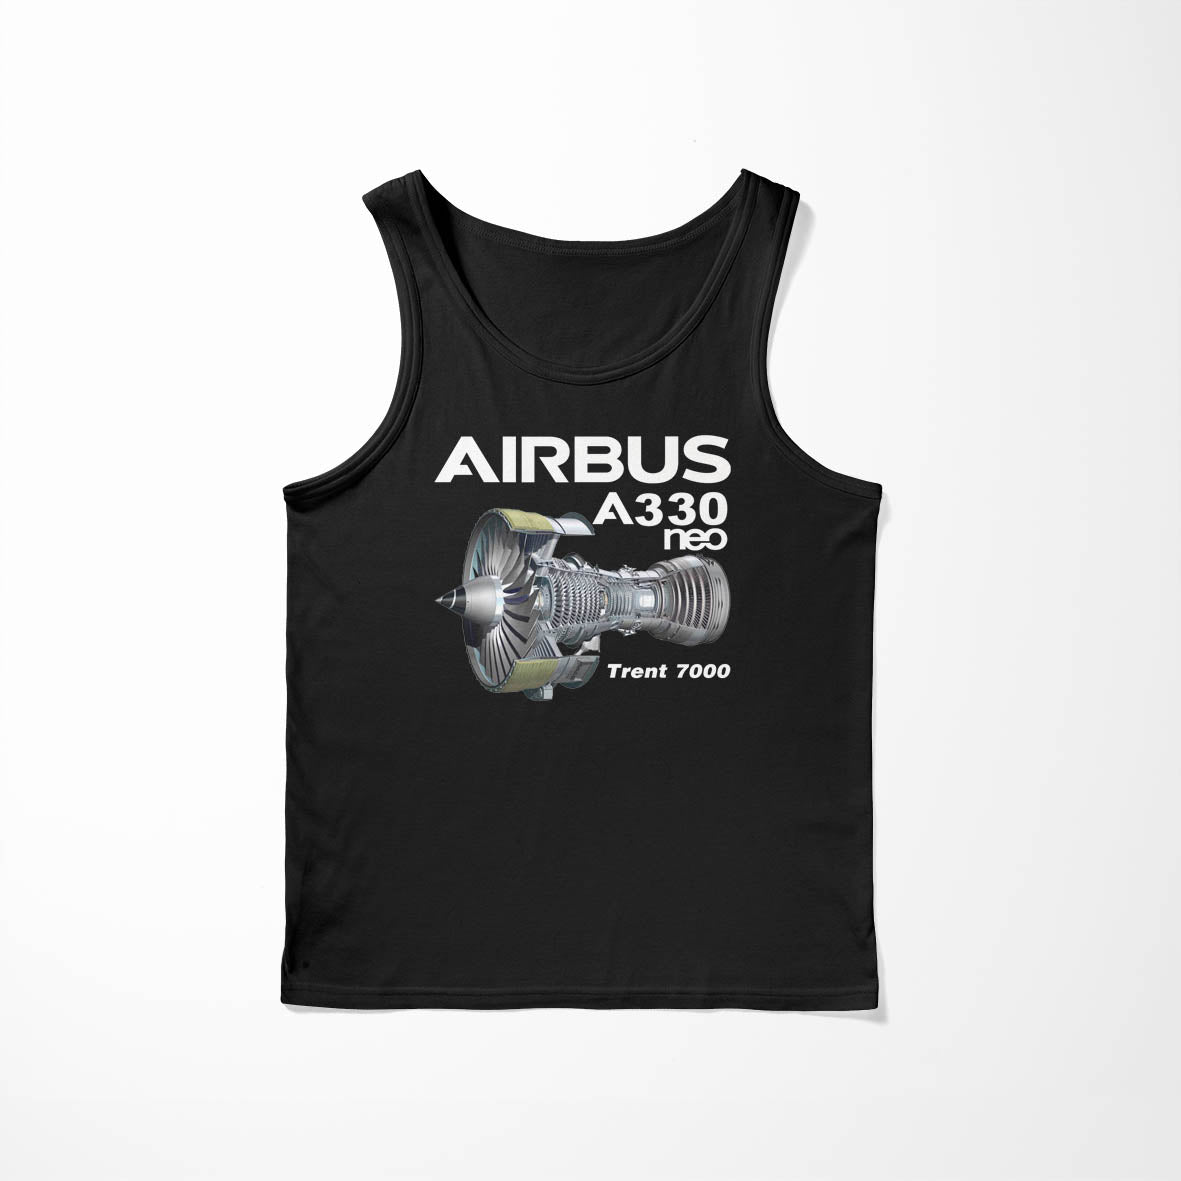 Airbus A330neo & Trent 7000 Engine Designed Tank Tops